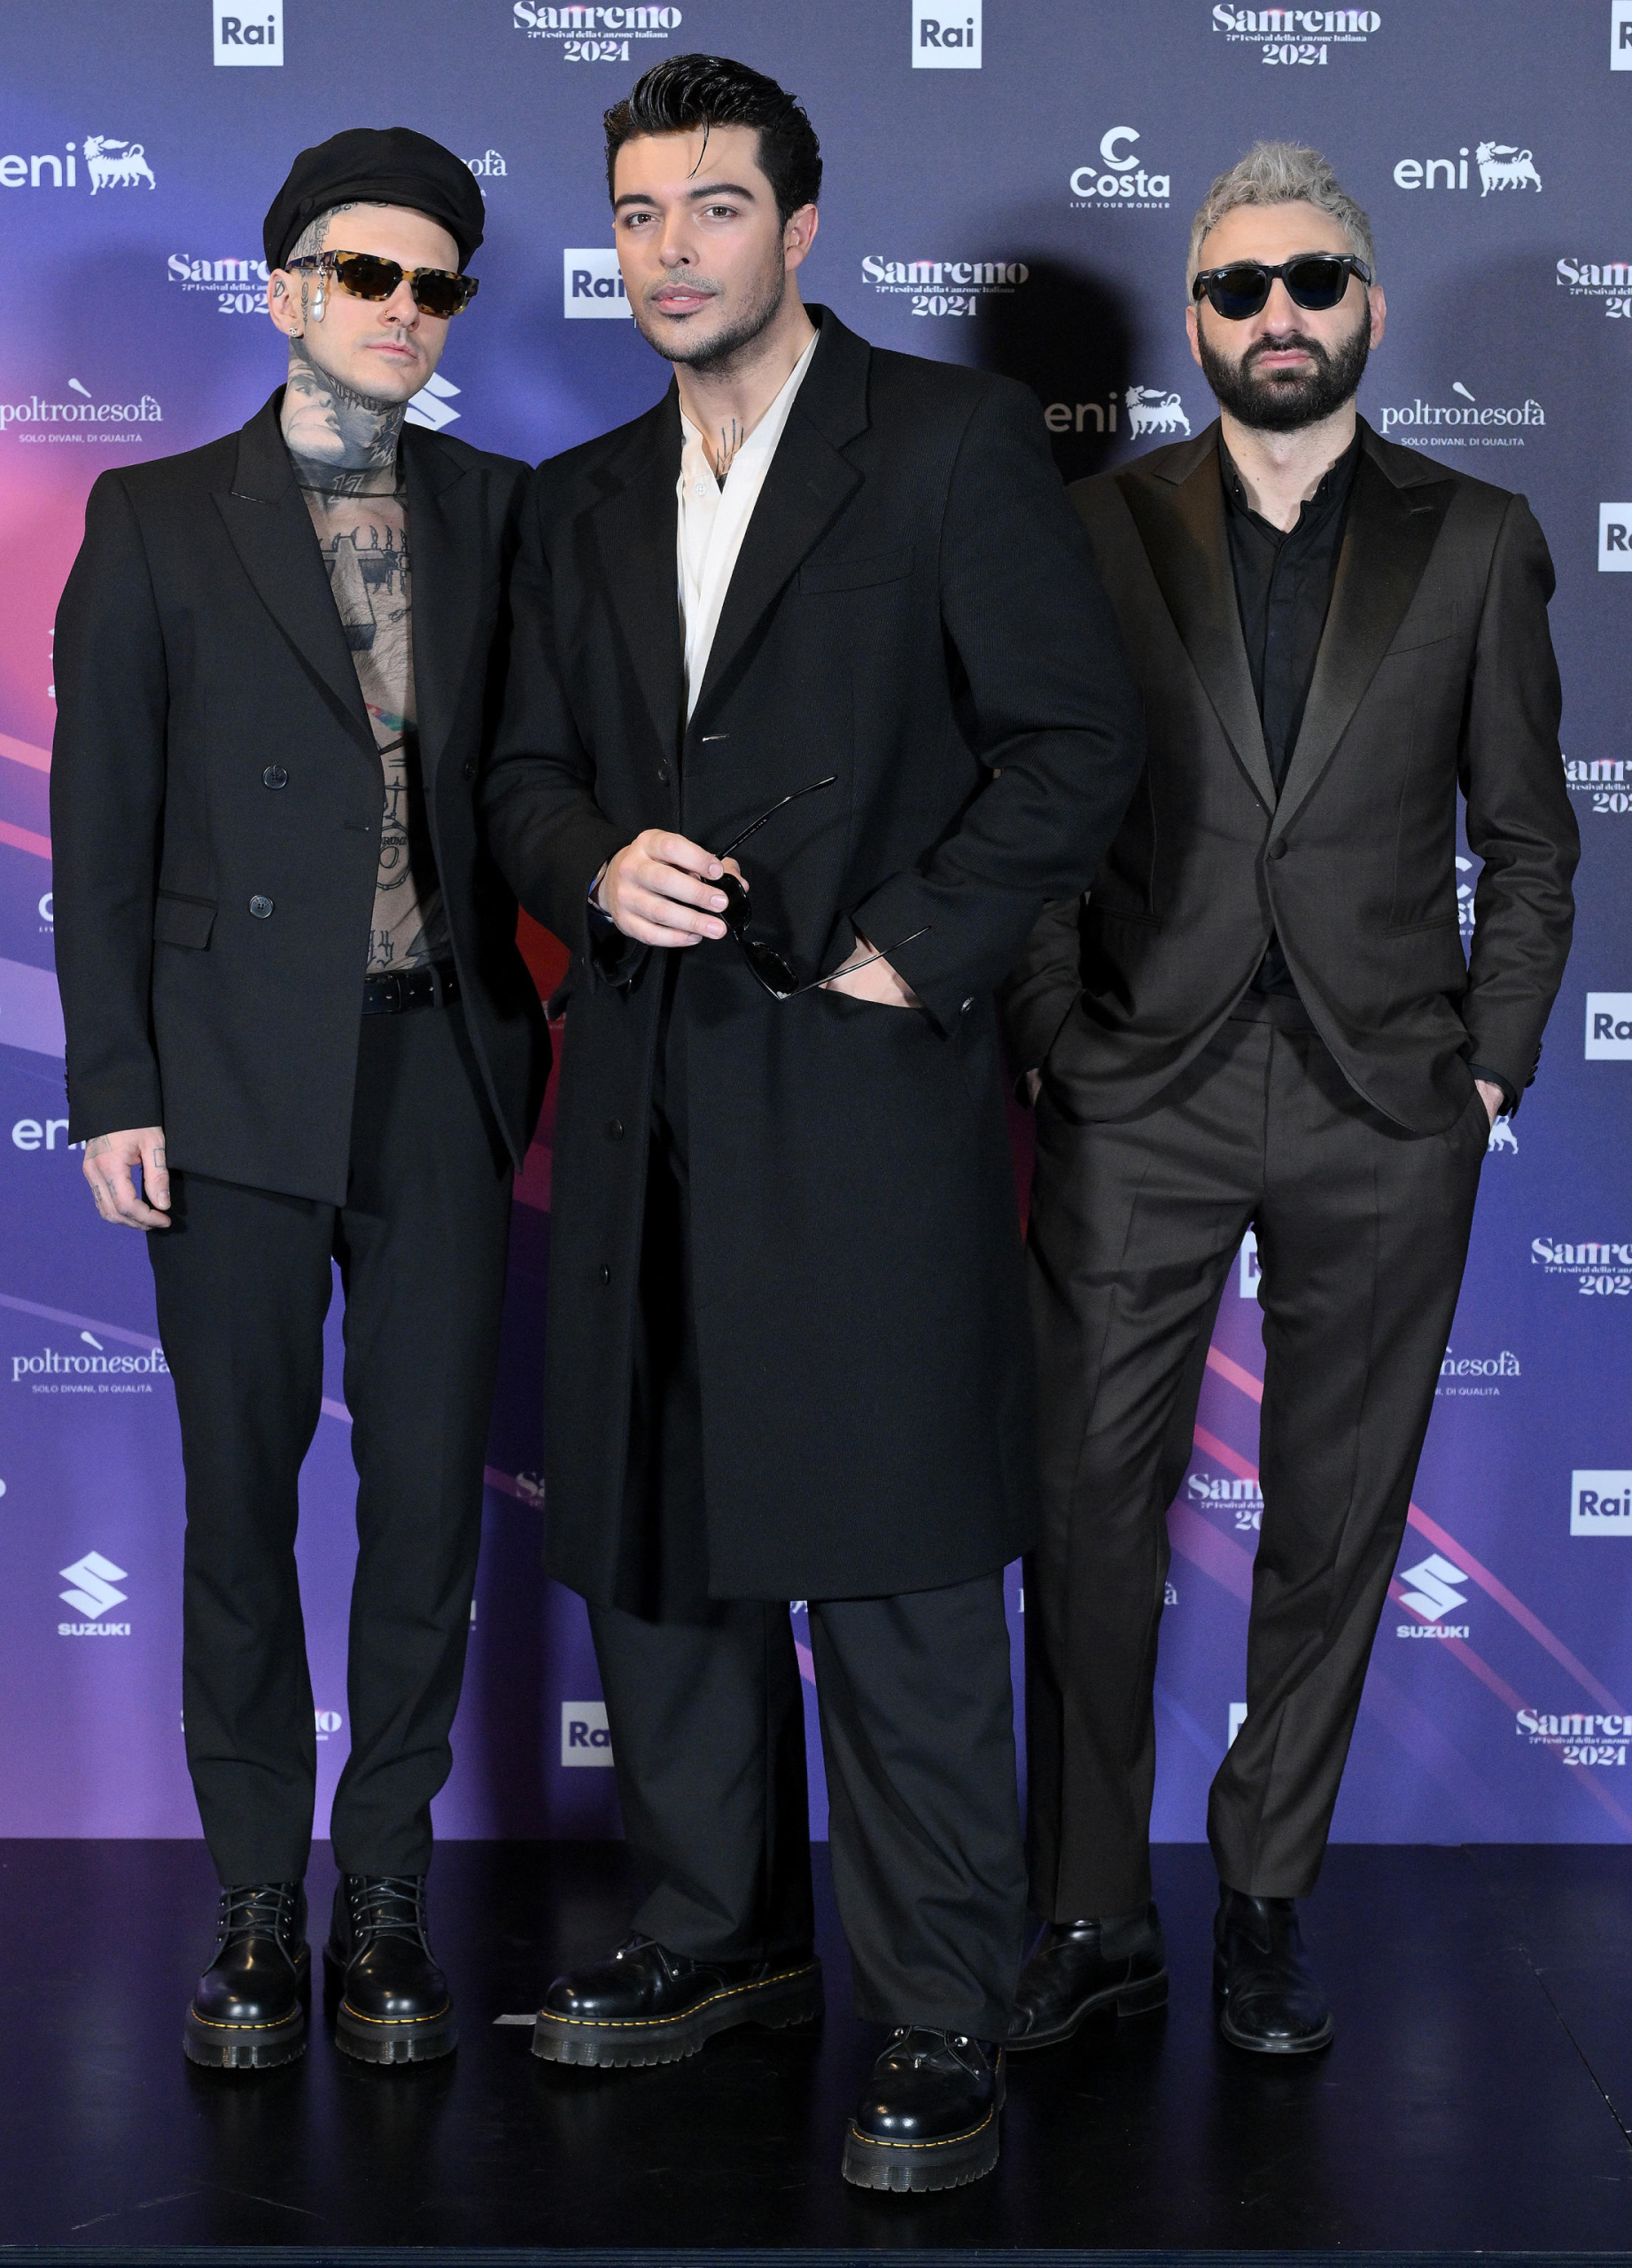 Italian band The Kolors pose during a photocall on the occasion of the 74th Sanremo Italian Song Festival, in Sanremo, Italy, 06 February 2024. The music festival will run from 06 to 10 February 2024.  
ANSA/ETTORE FERRARI